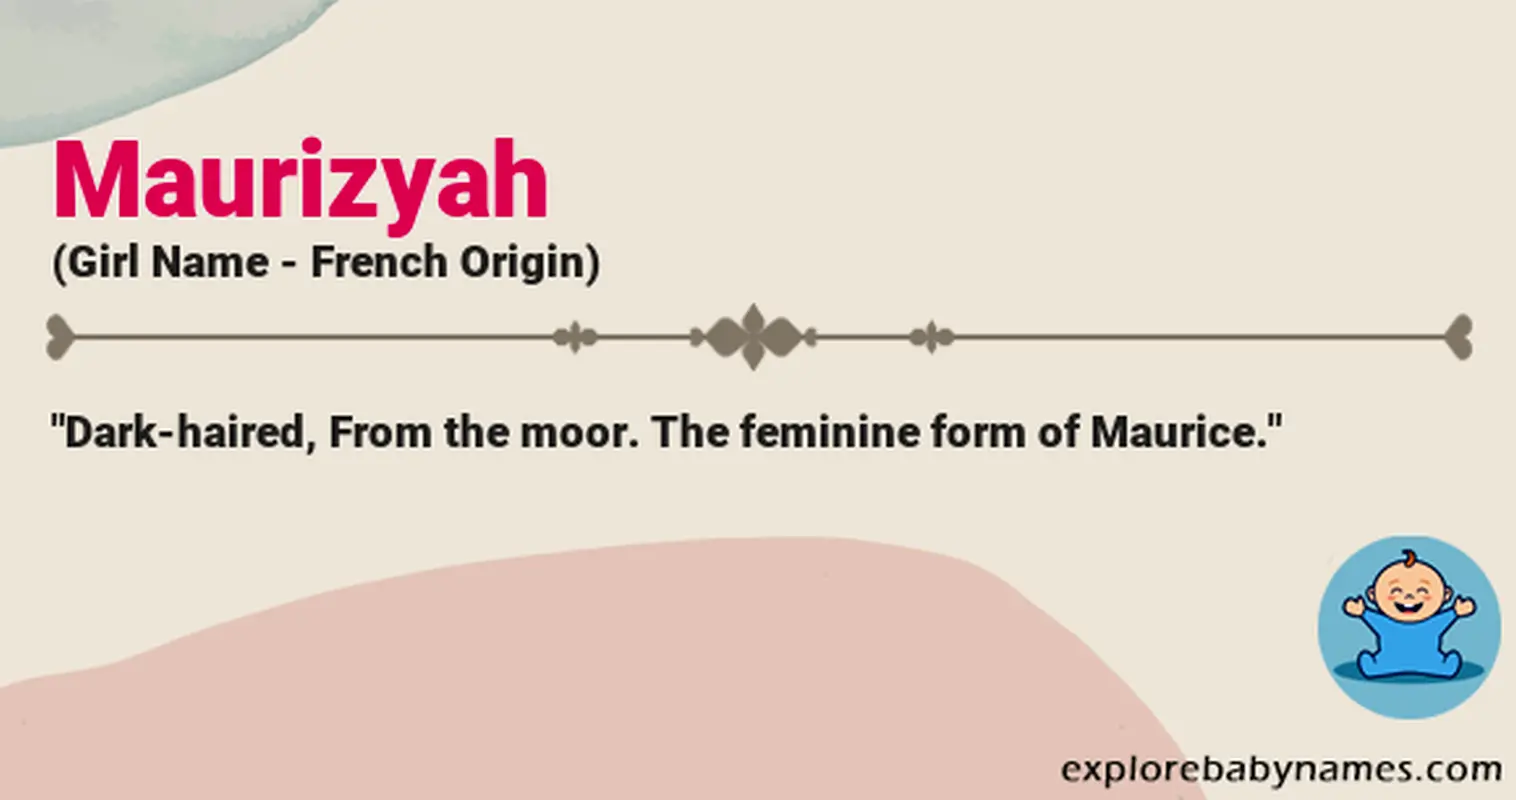 Meaning of Maurizyah